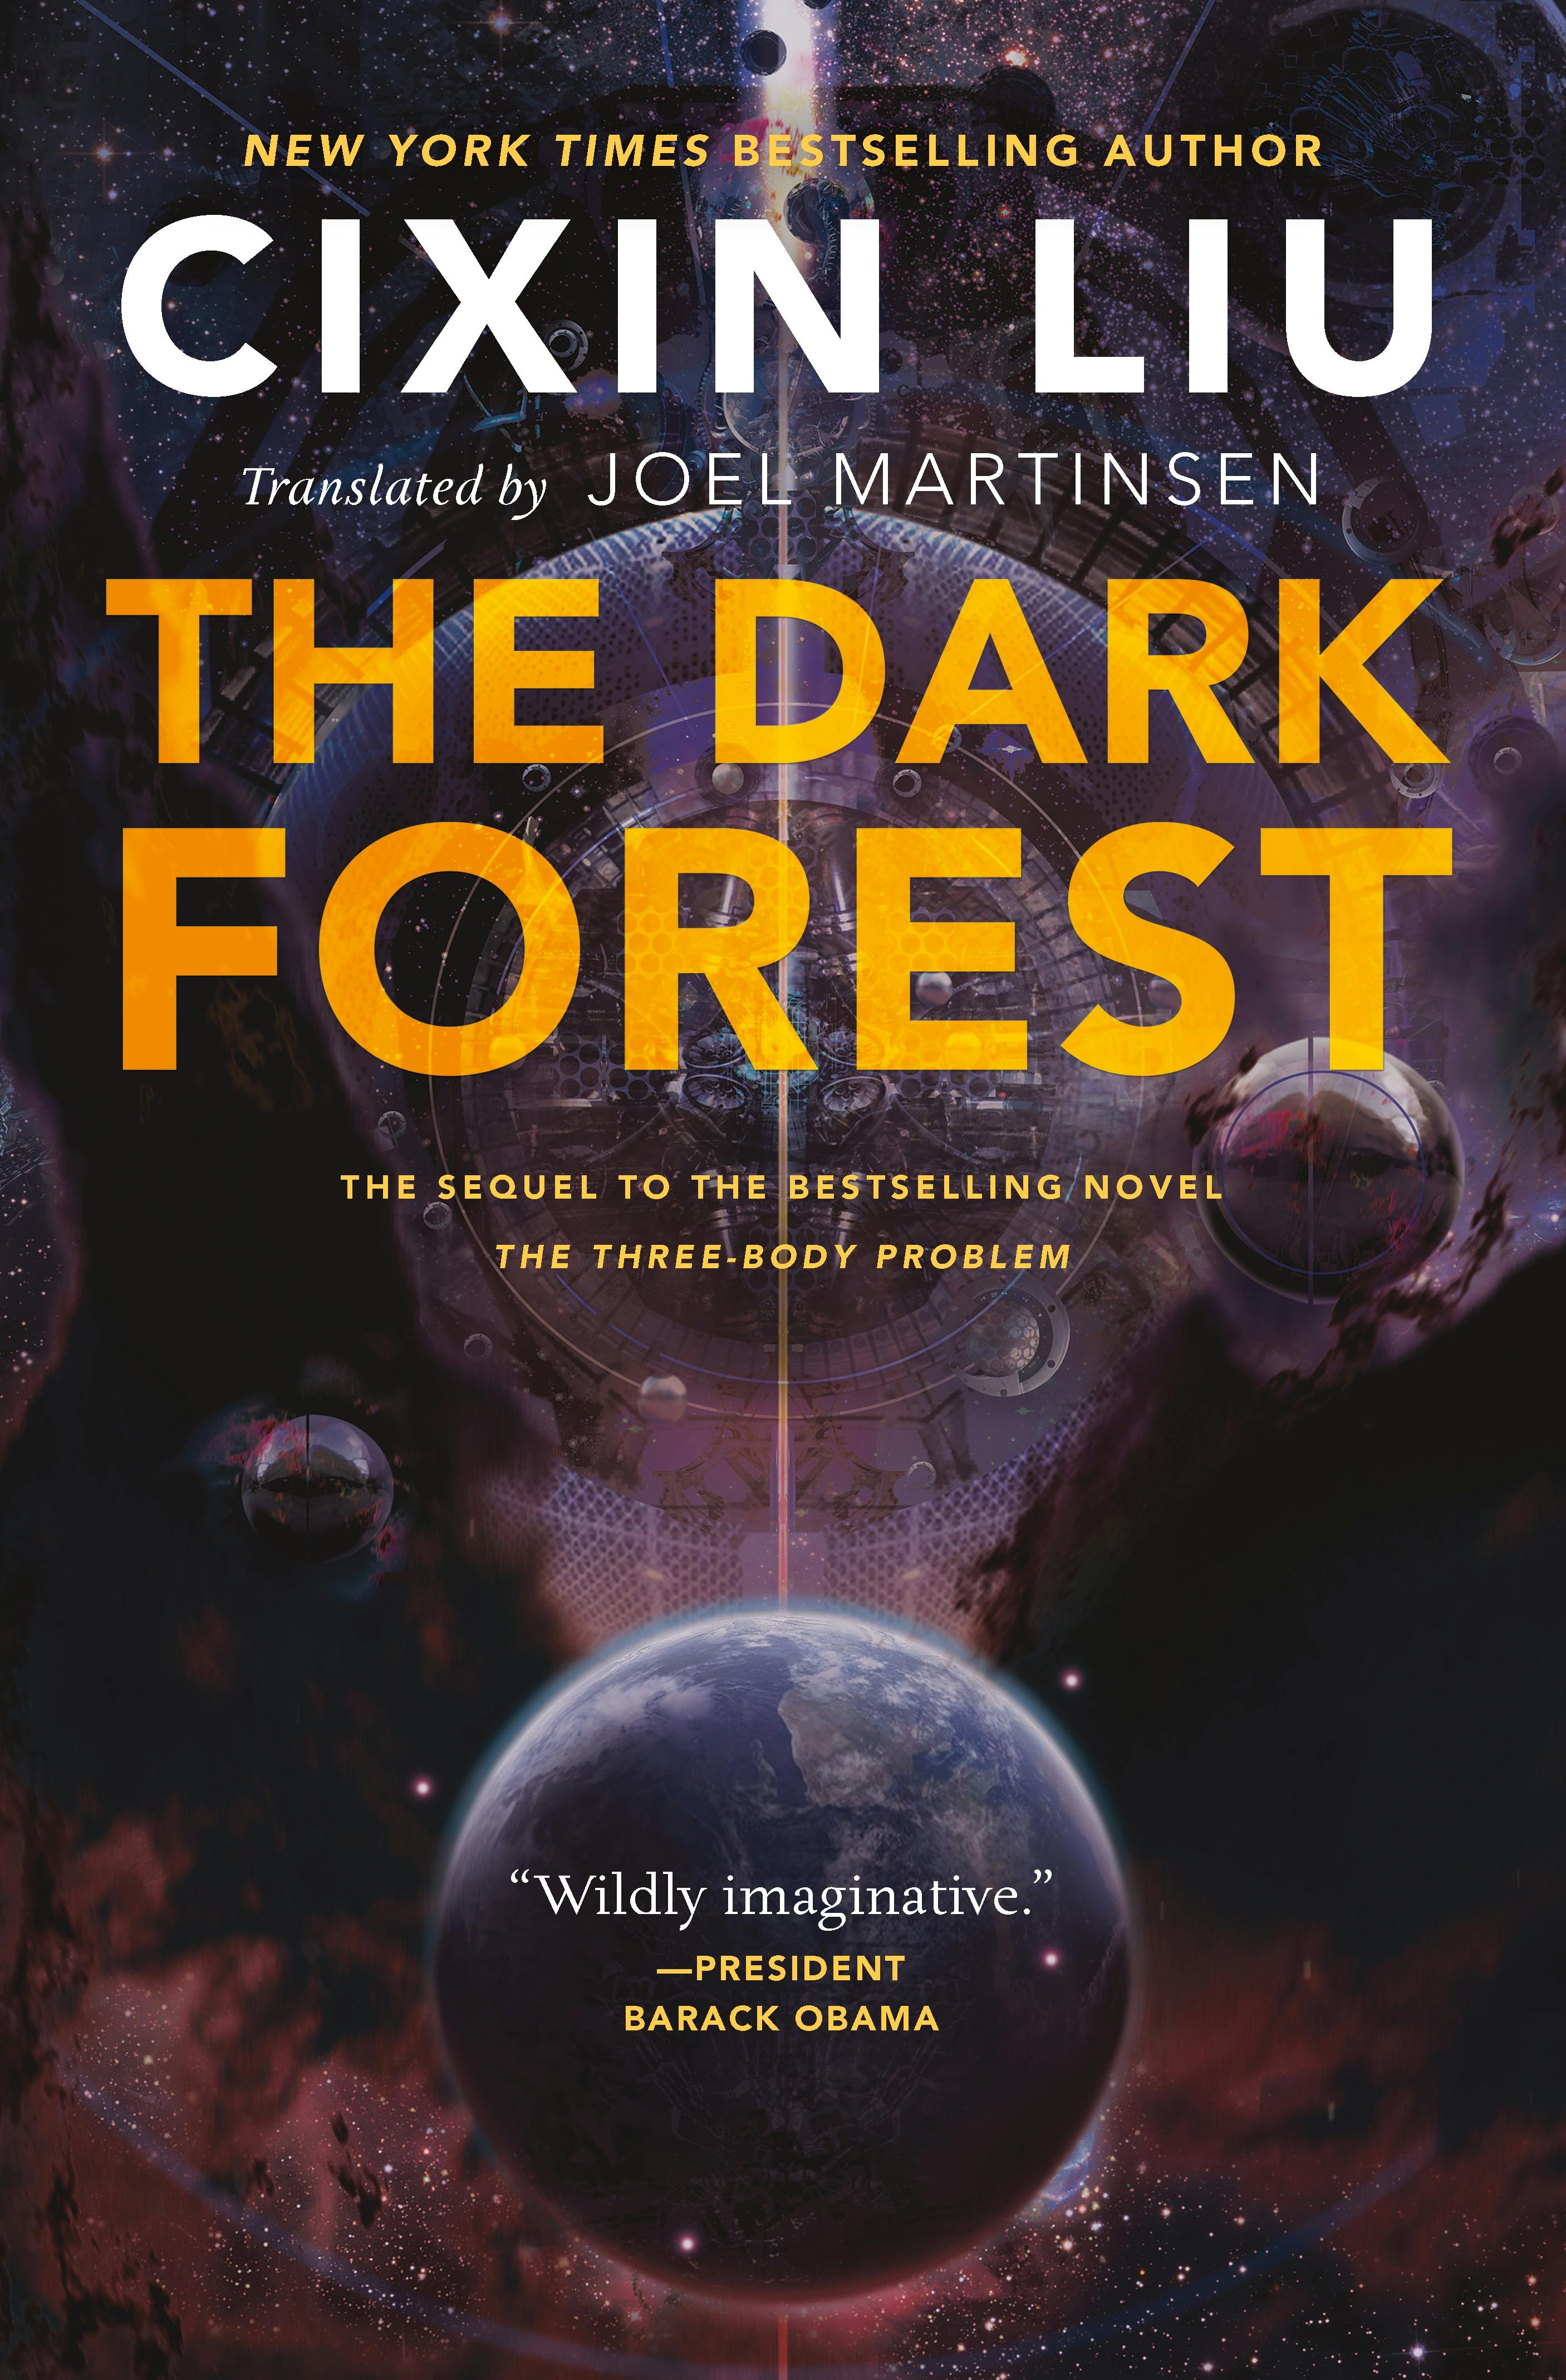 Cover for the book titled as: The Dark Forest